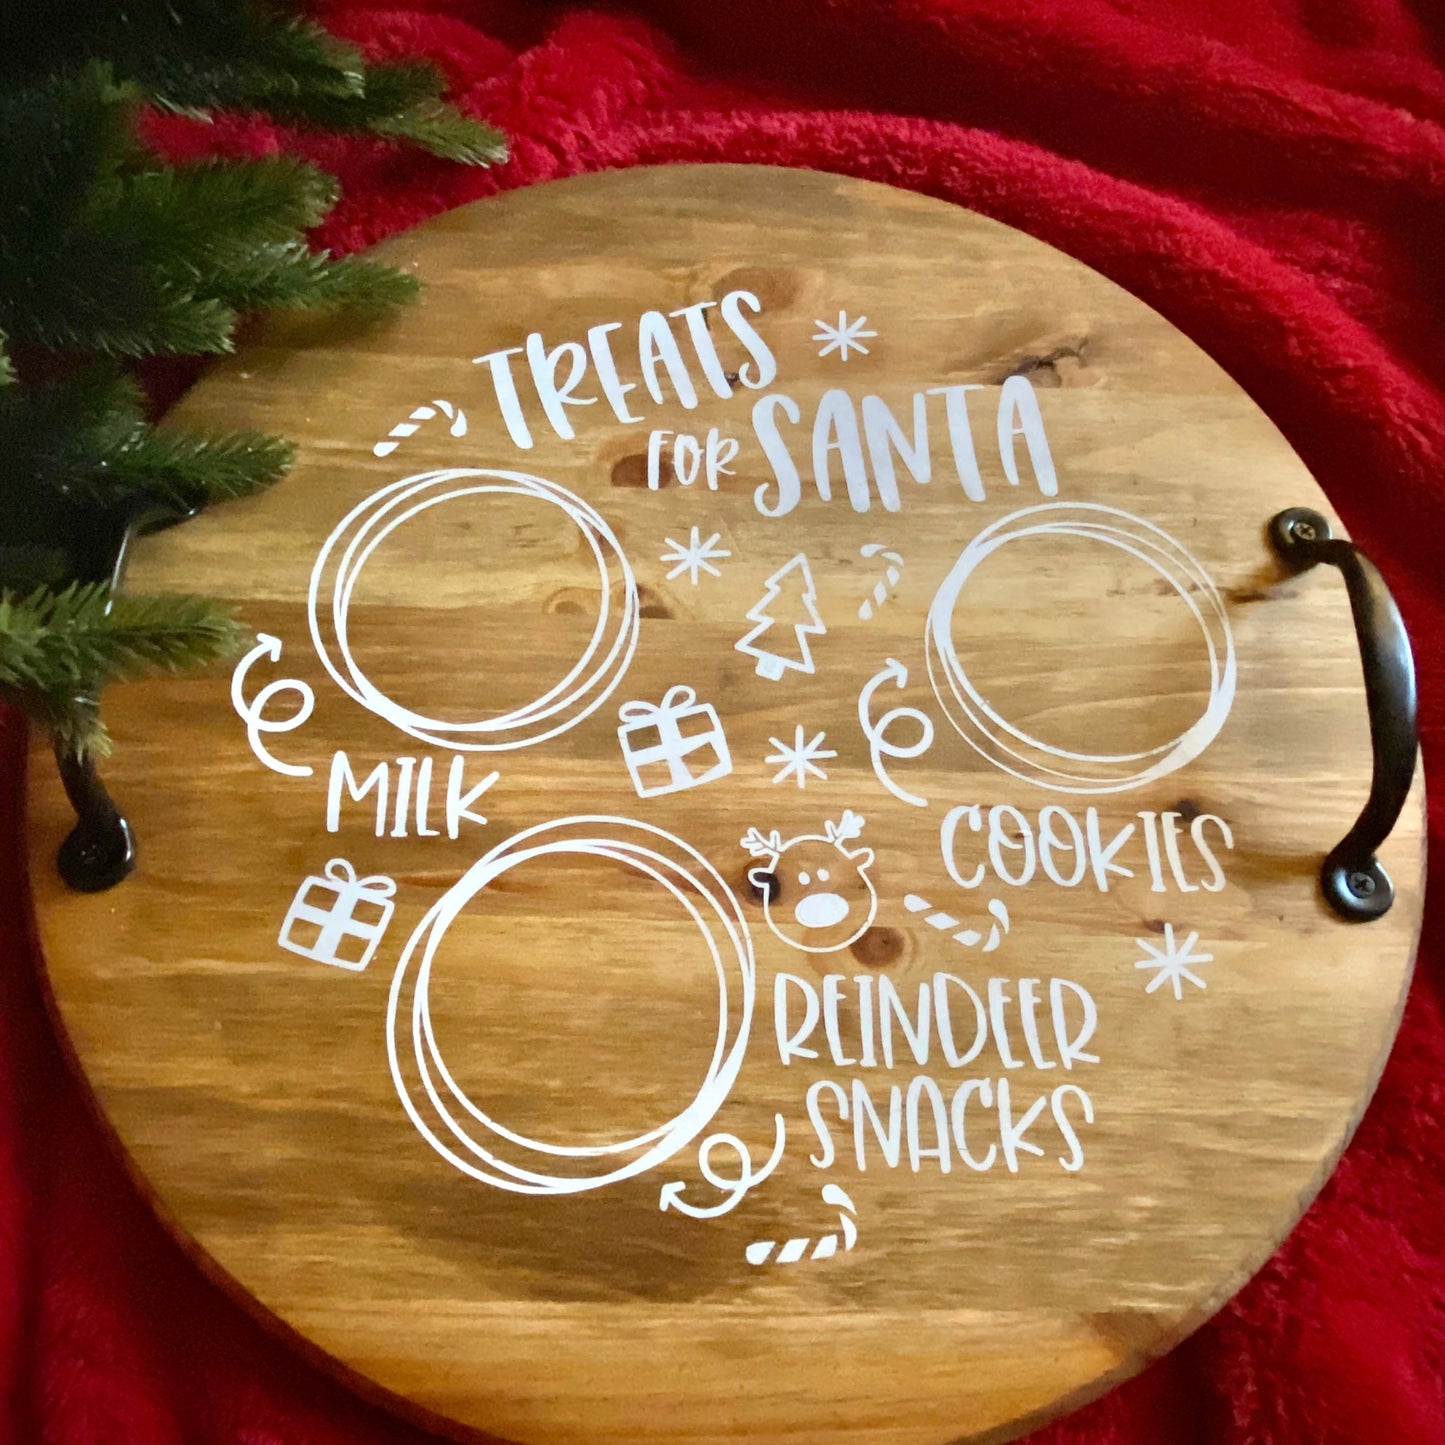 Finished Cookies for Santa Tray